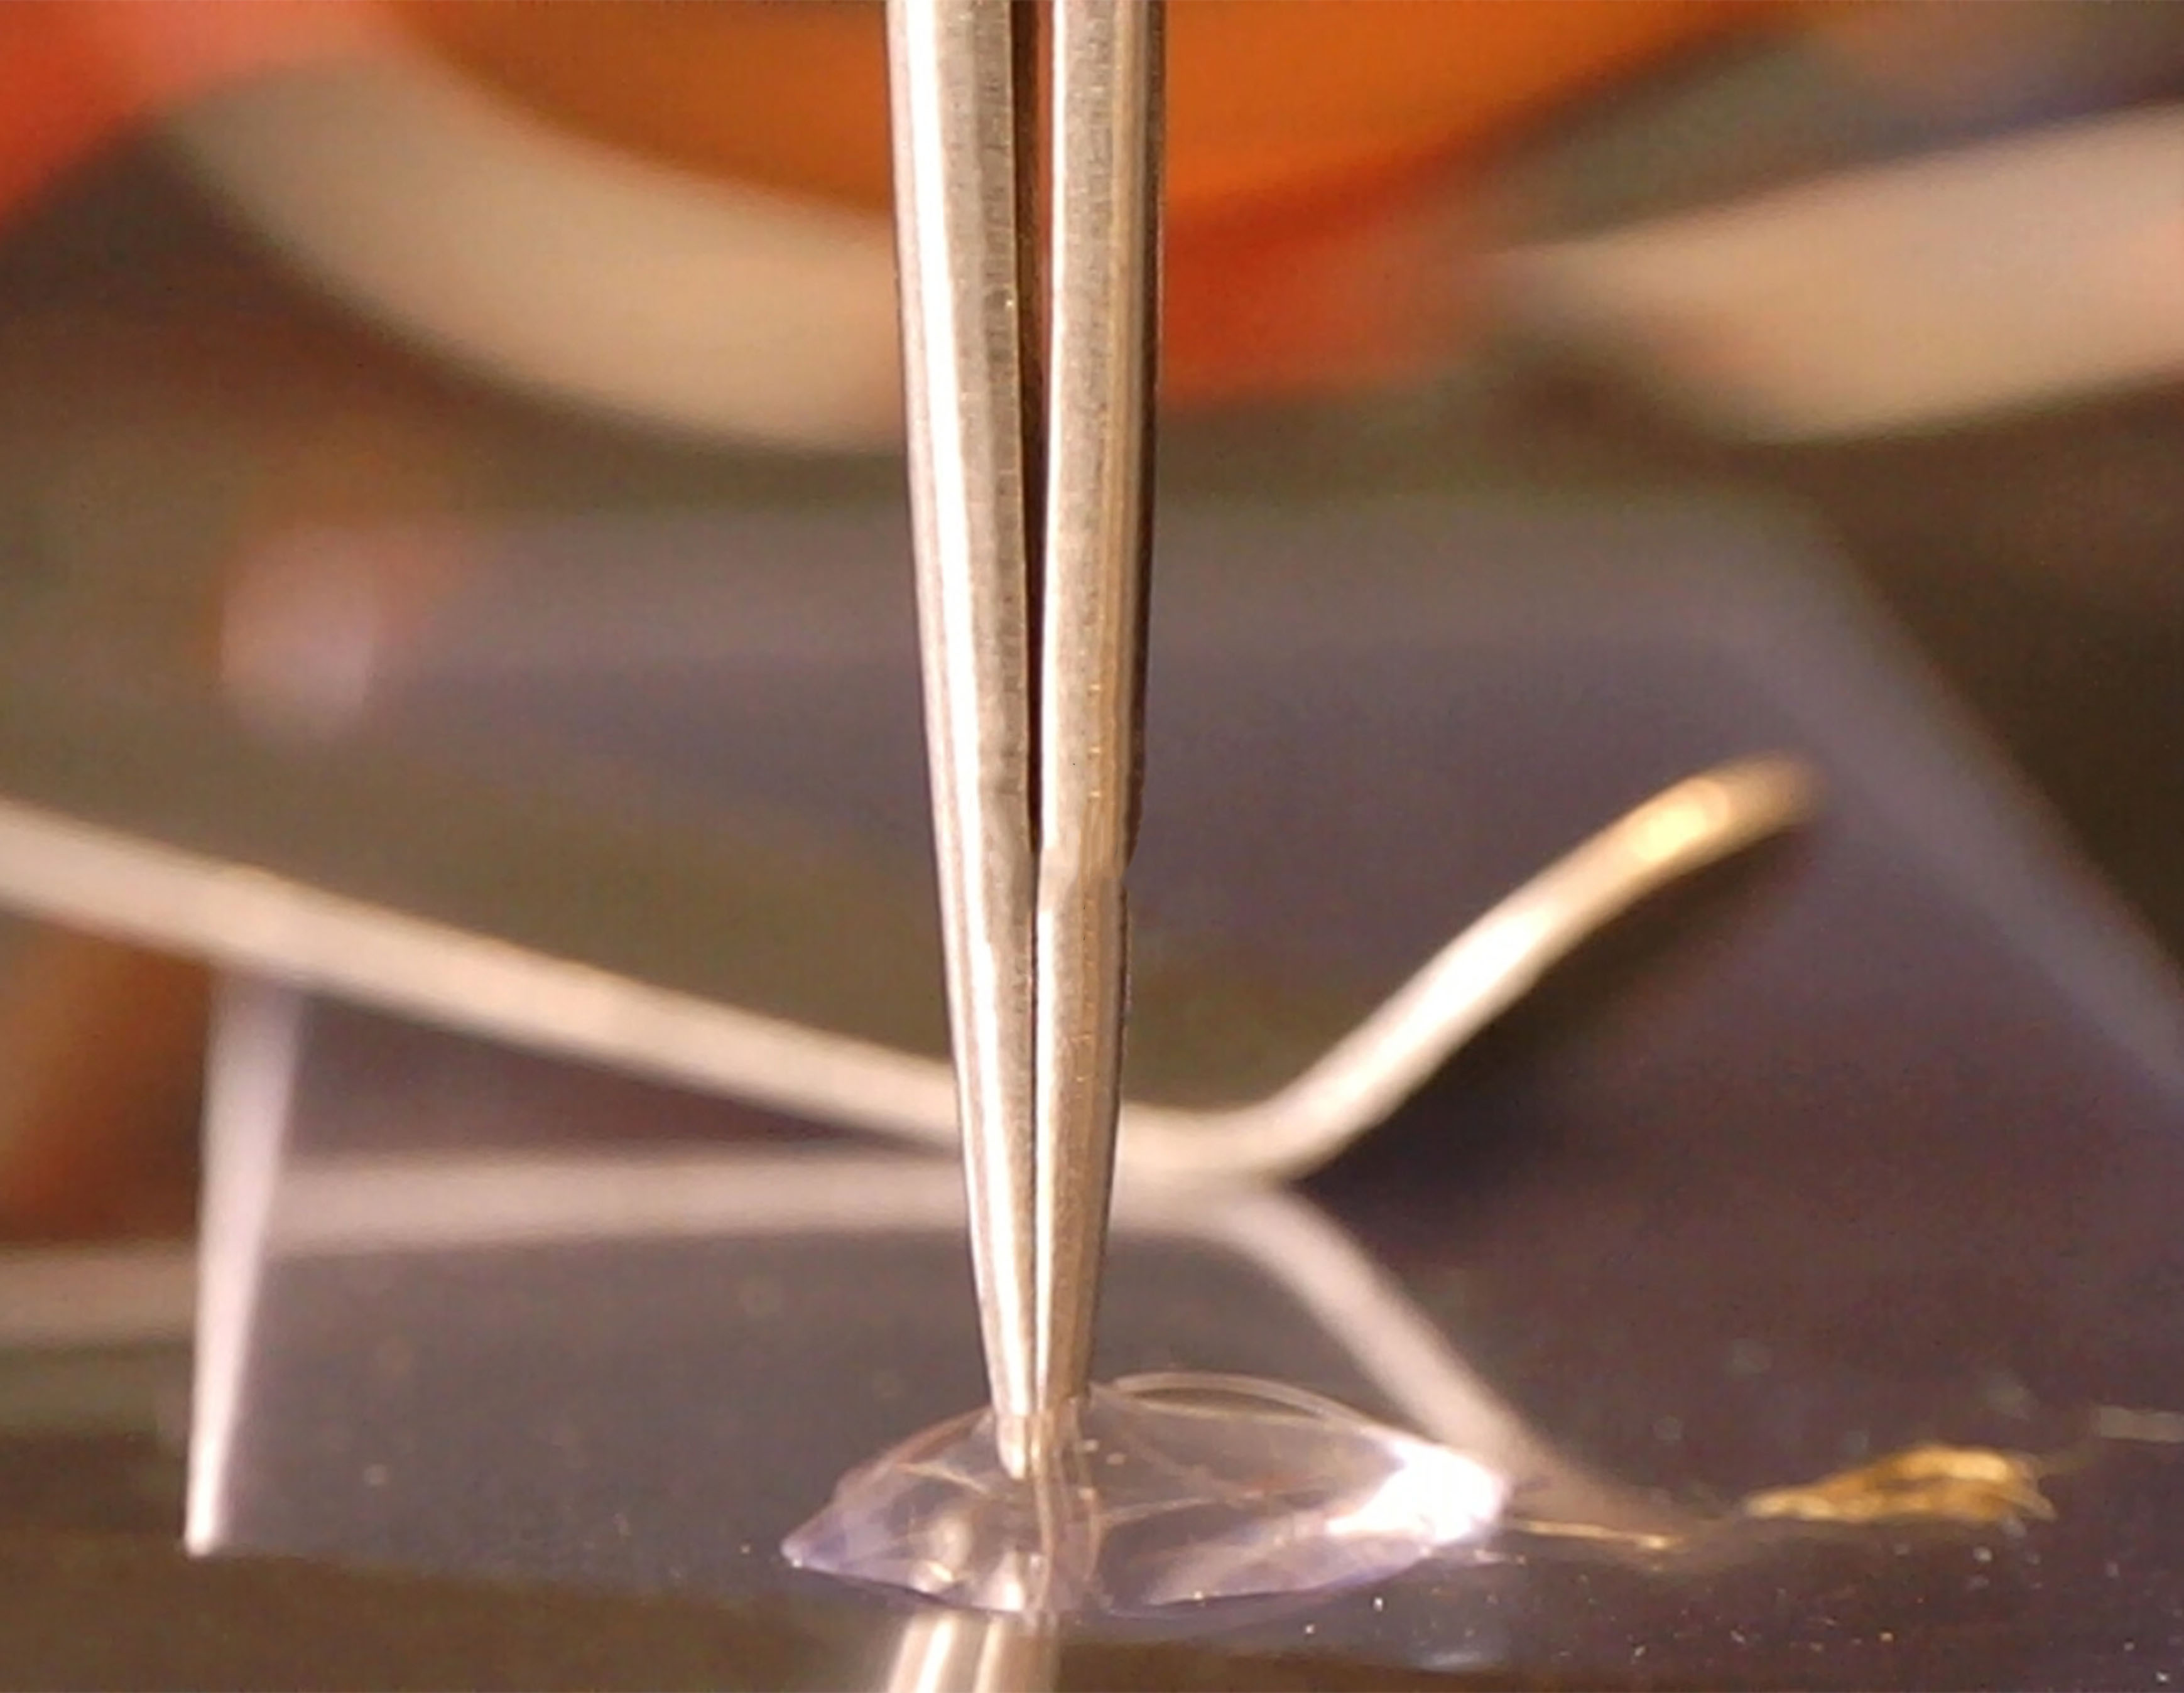 forceps lined up on plaque-substrate to run a single-plaque tensile detachment test